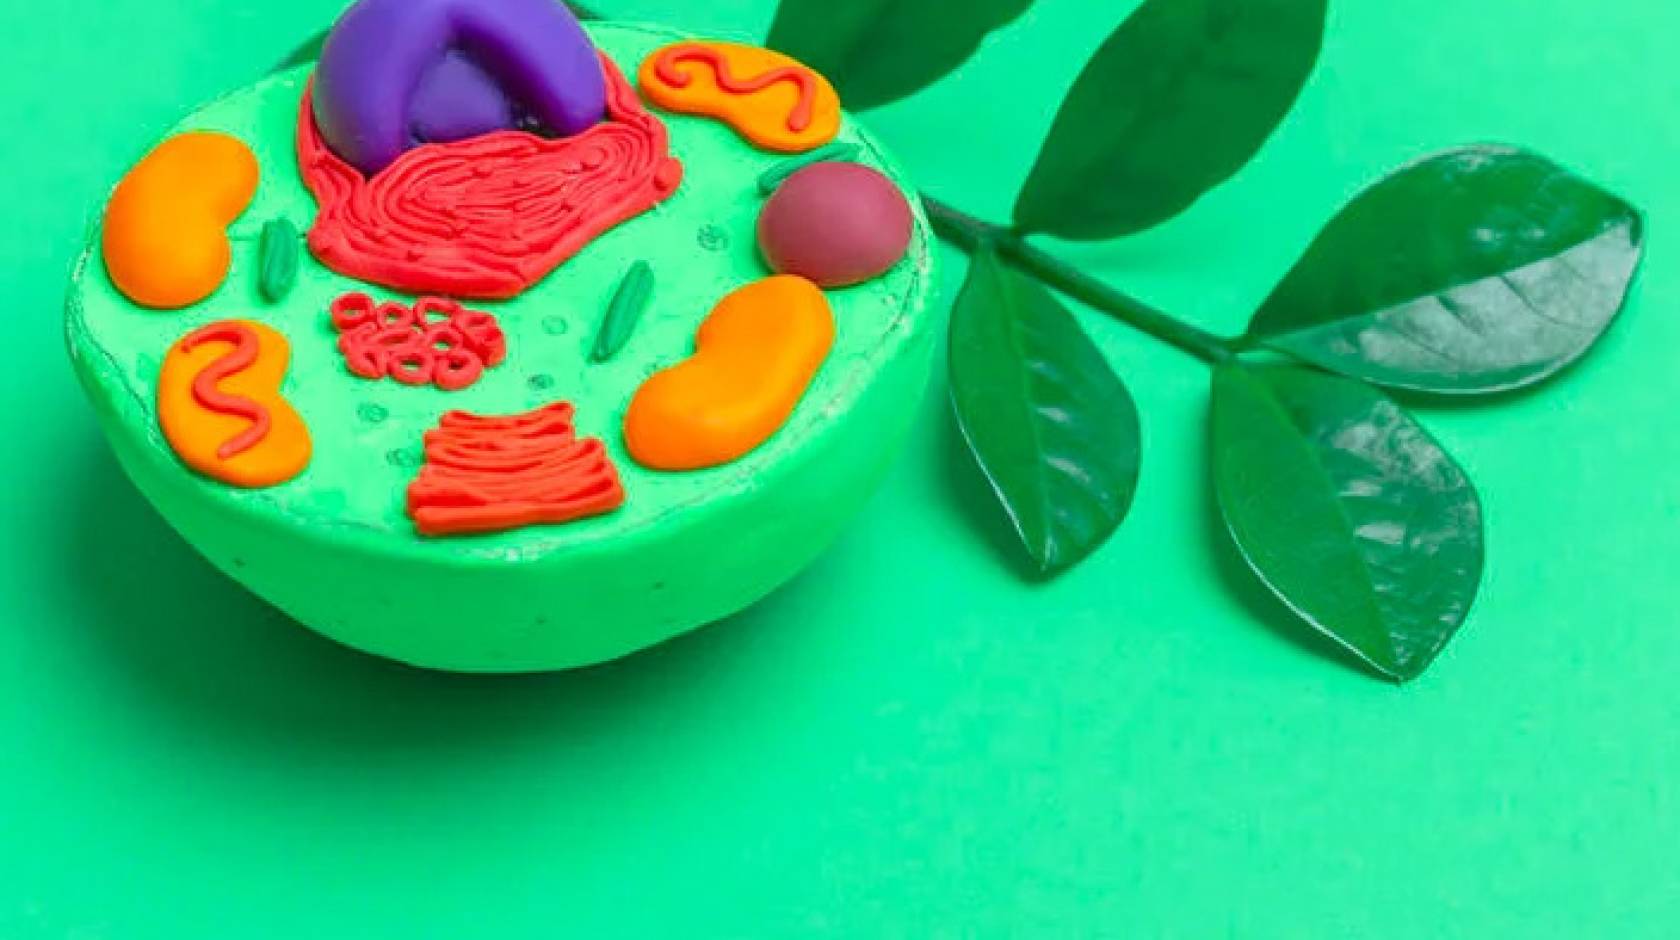 Bright green clay model of a cell showing organelles in contrasting colors, on a bright green background, with a sprig of leaves 